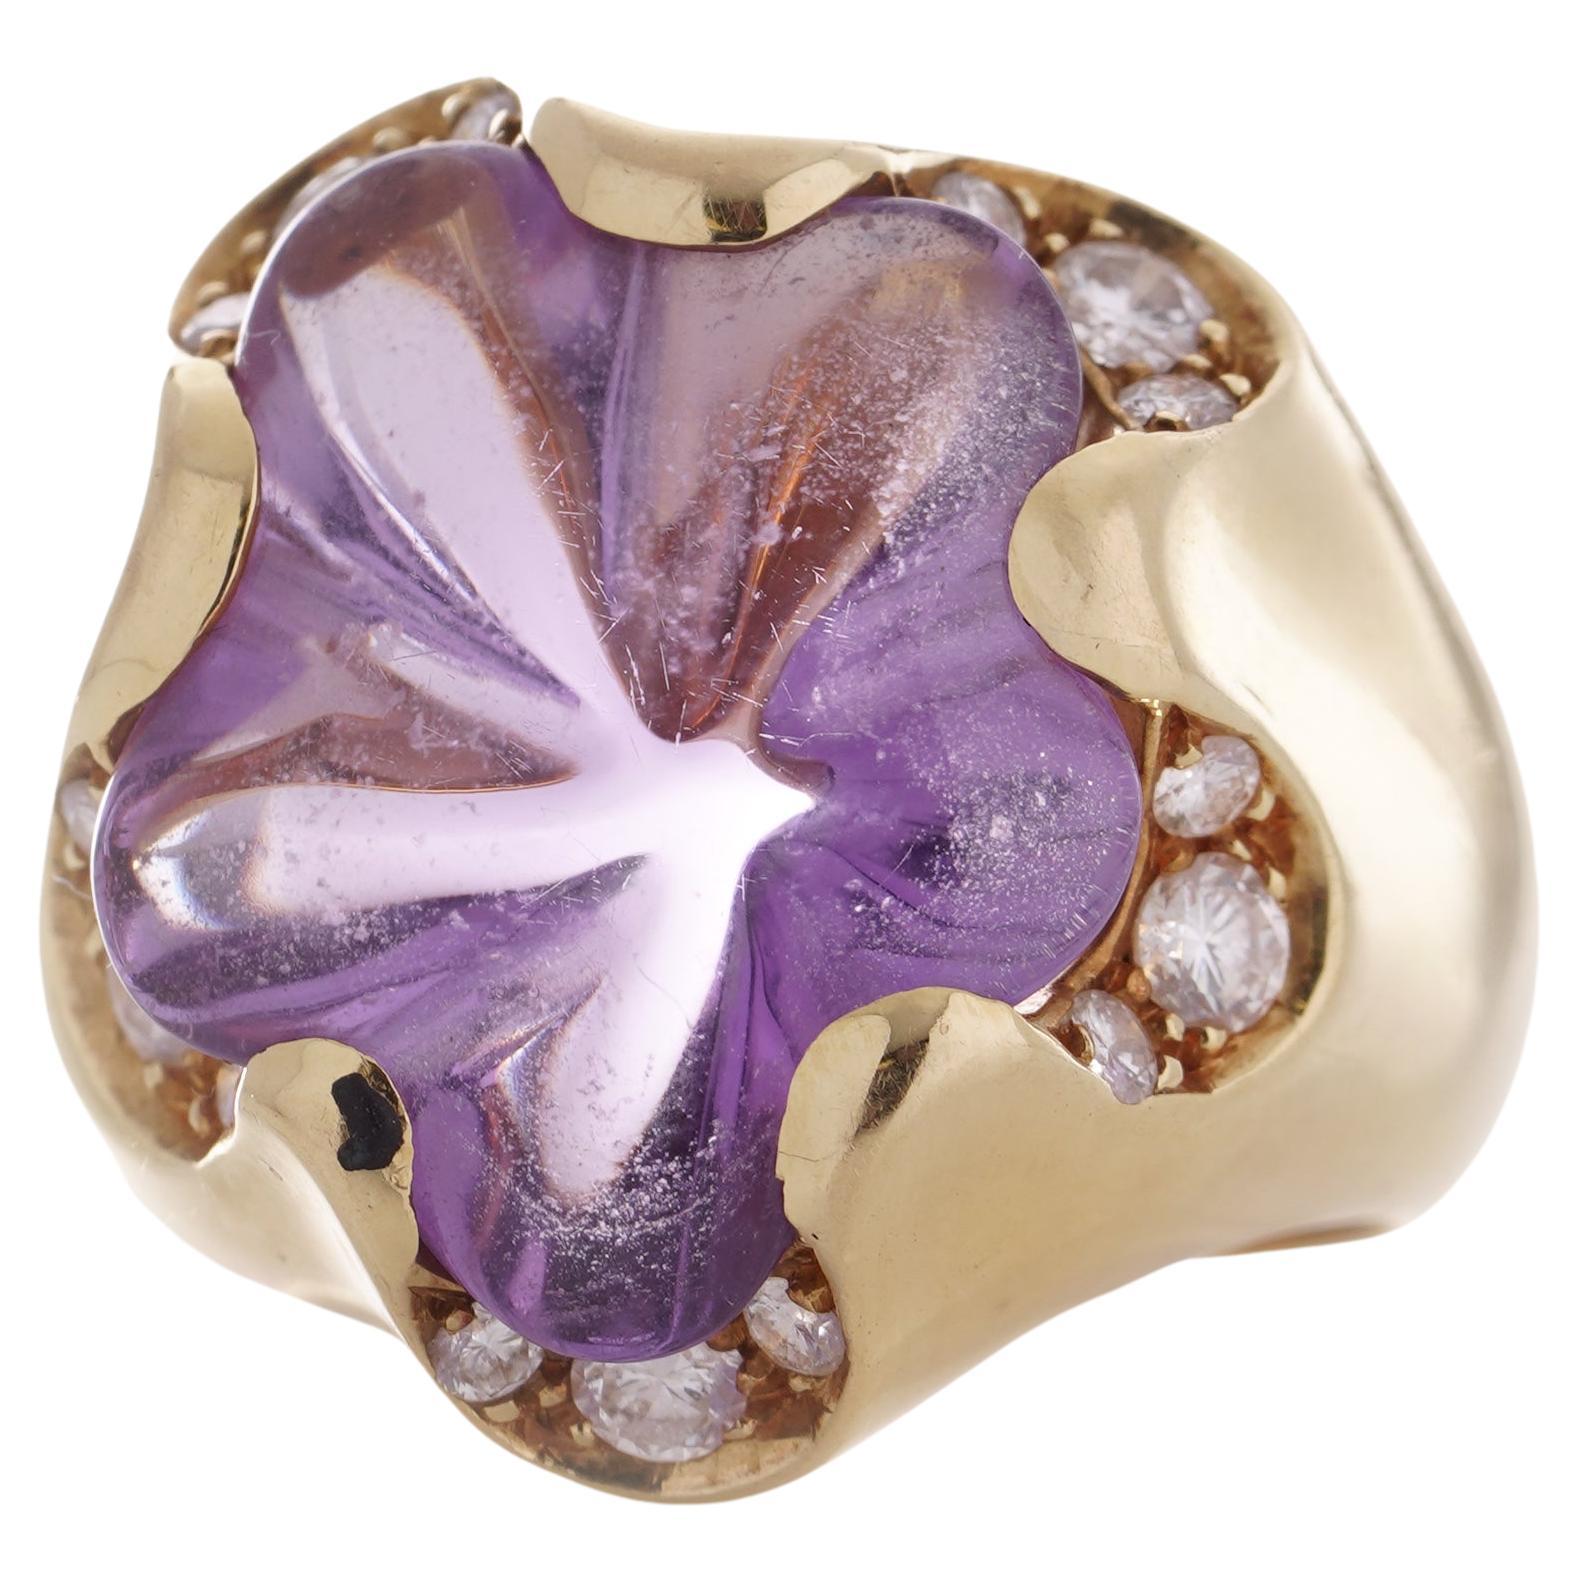 Fred of Paris 18kt. yellow gold Amethyst and diamond ring.

This ring features a floral-shaped amethyst, securely set within a polished bezel, accompanied by fifteen brilliant round-cut diamonds delicately bead-set onto the petals. The amethyst